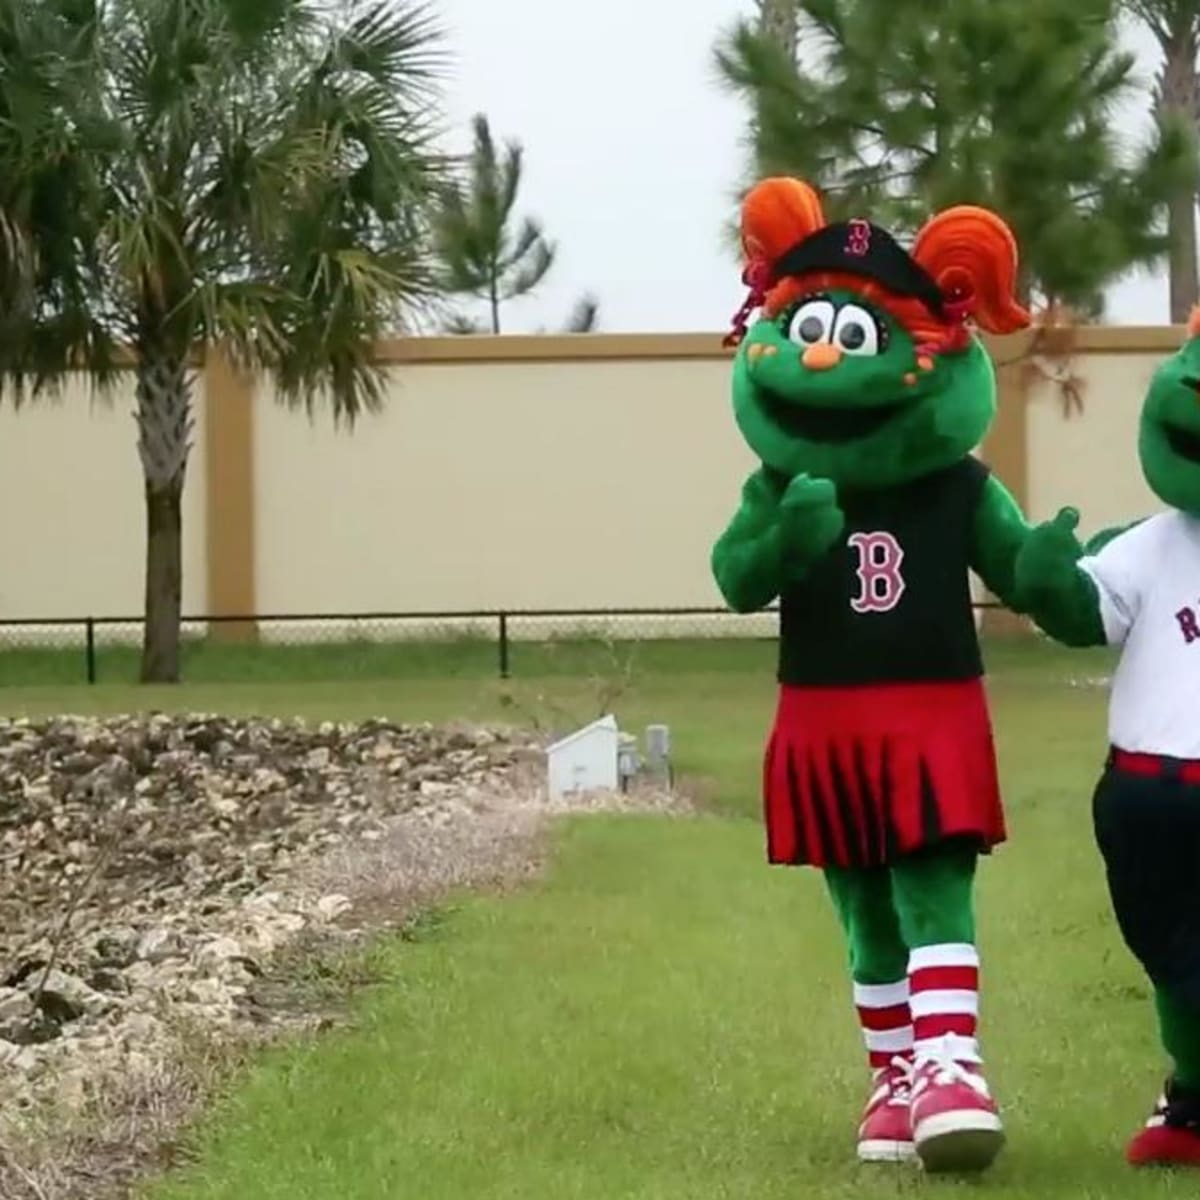 Boston Red Sox unveil new mascot: Tessie the Green Monster, little